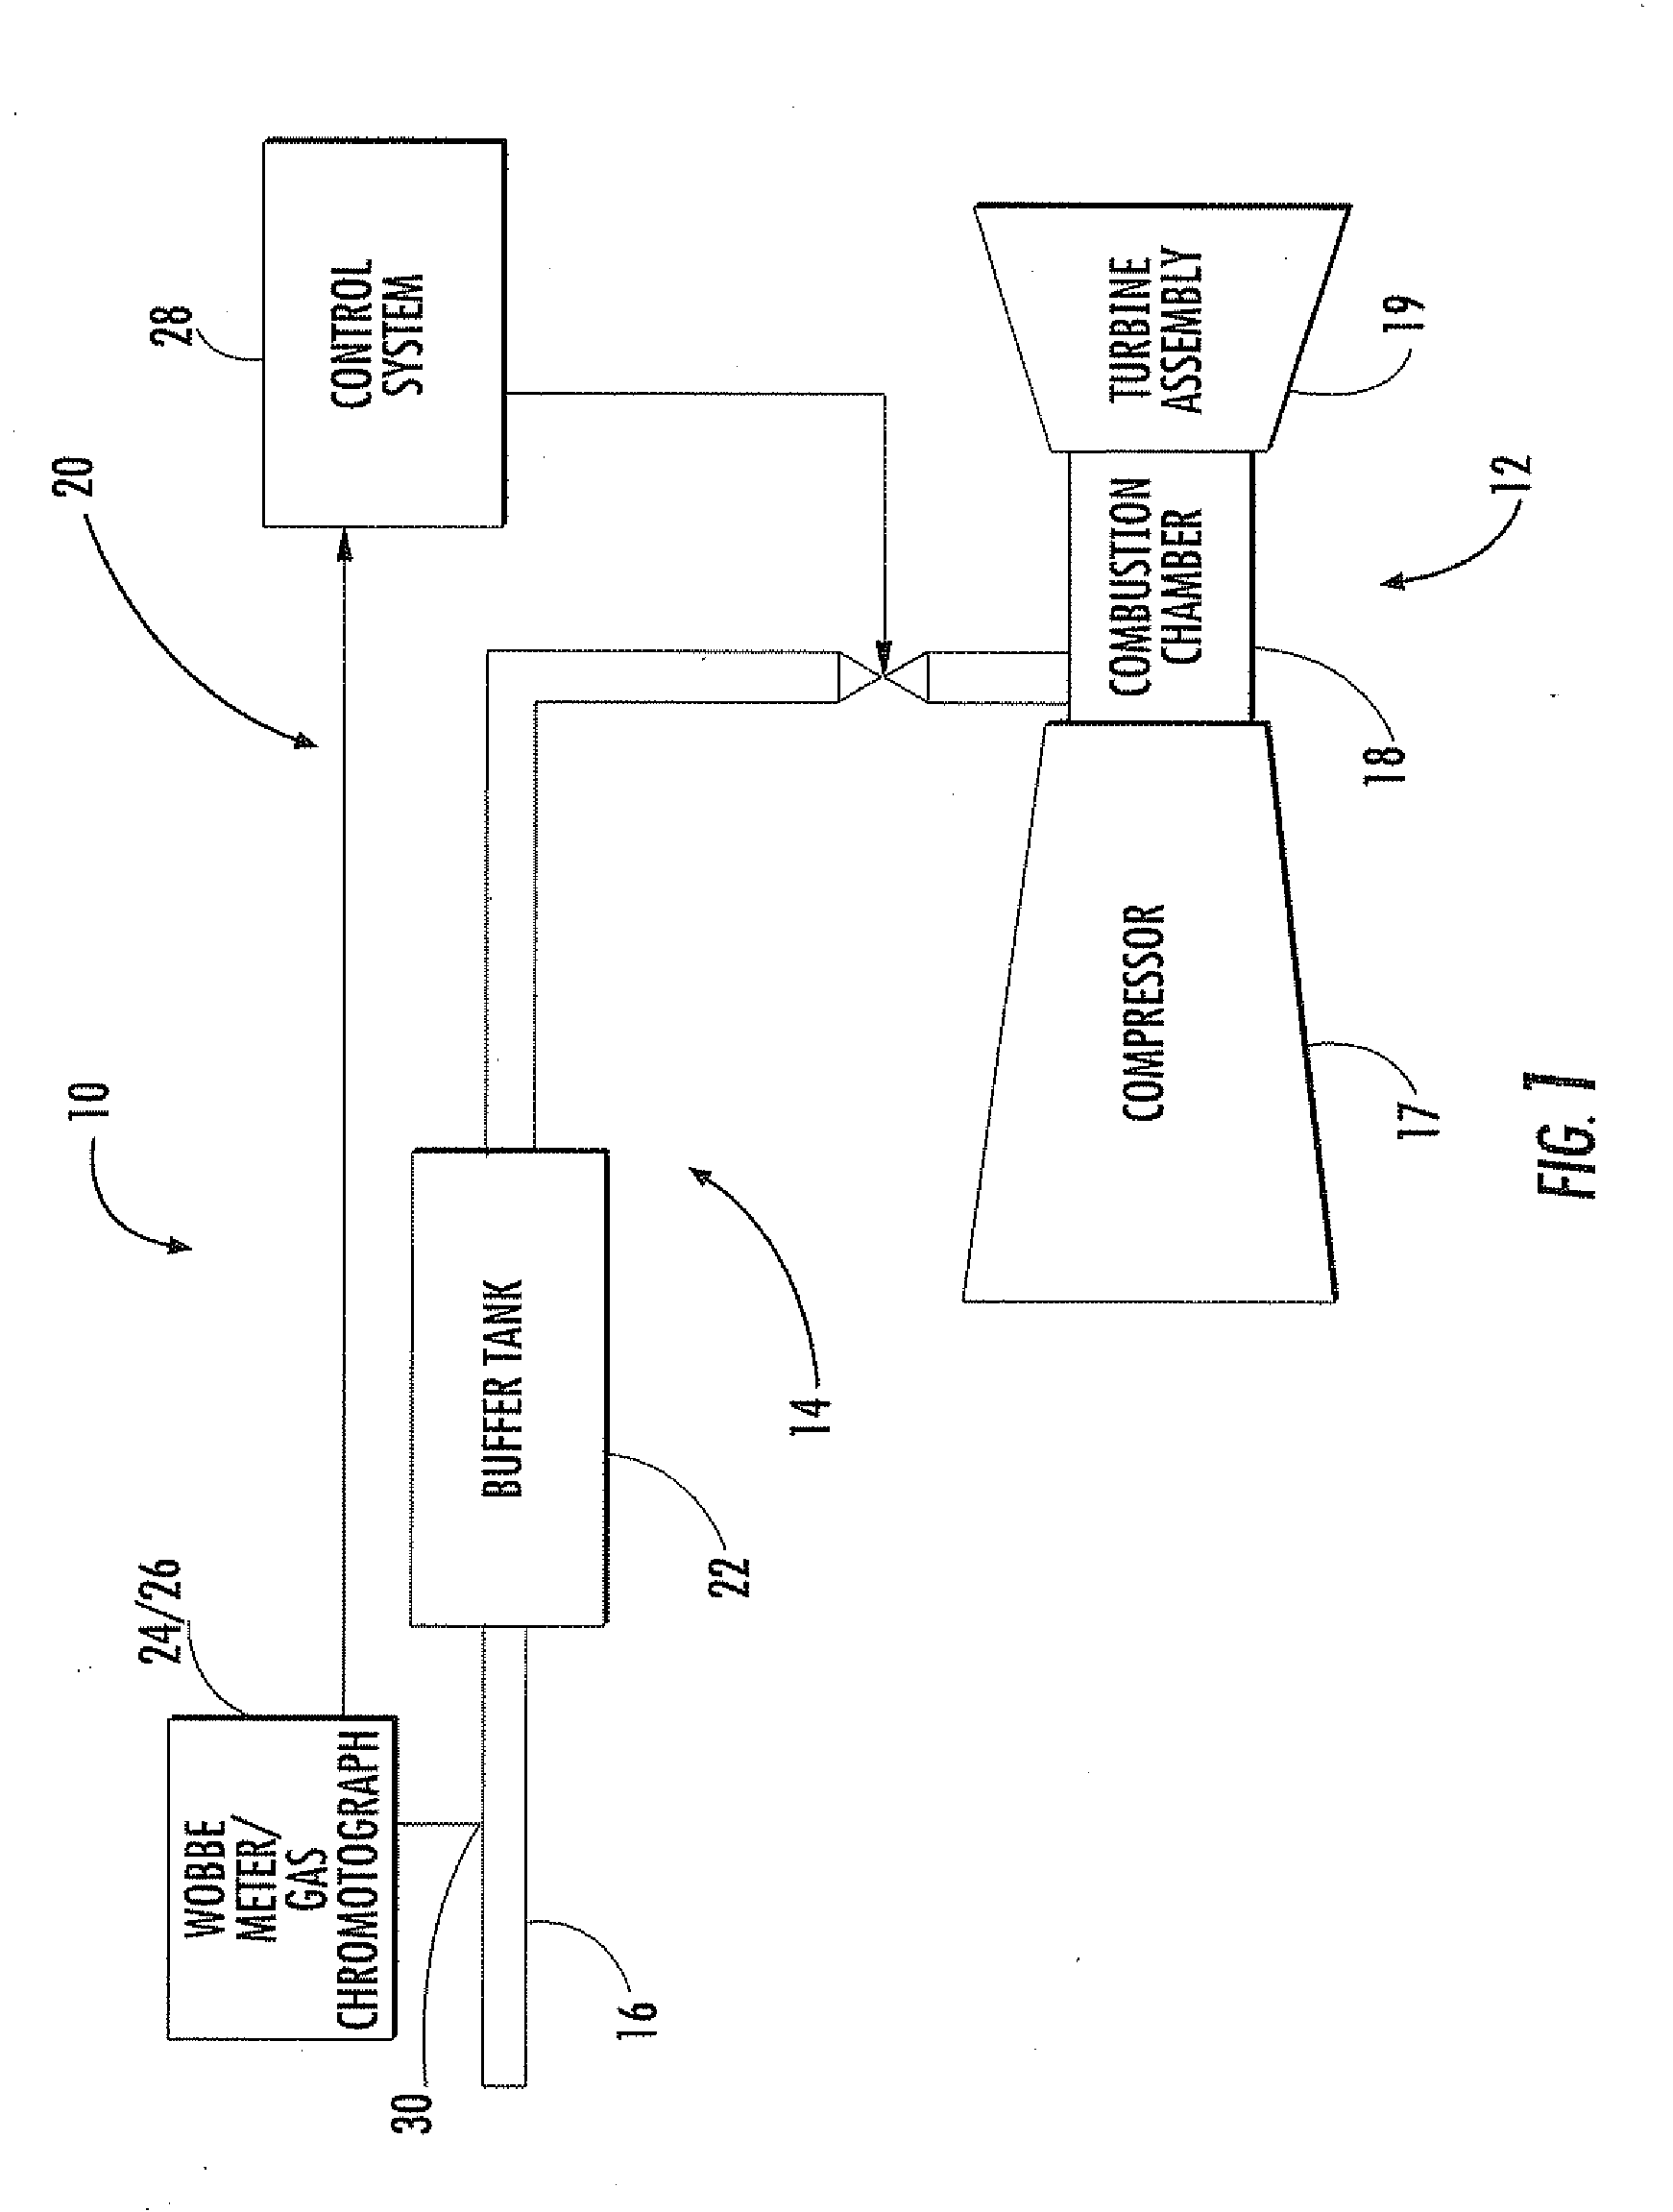 Integrated Fuel Gas Characterization System